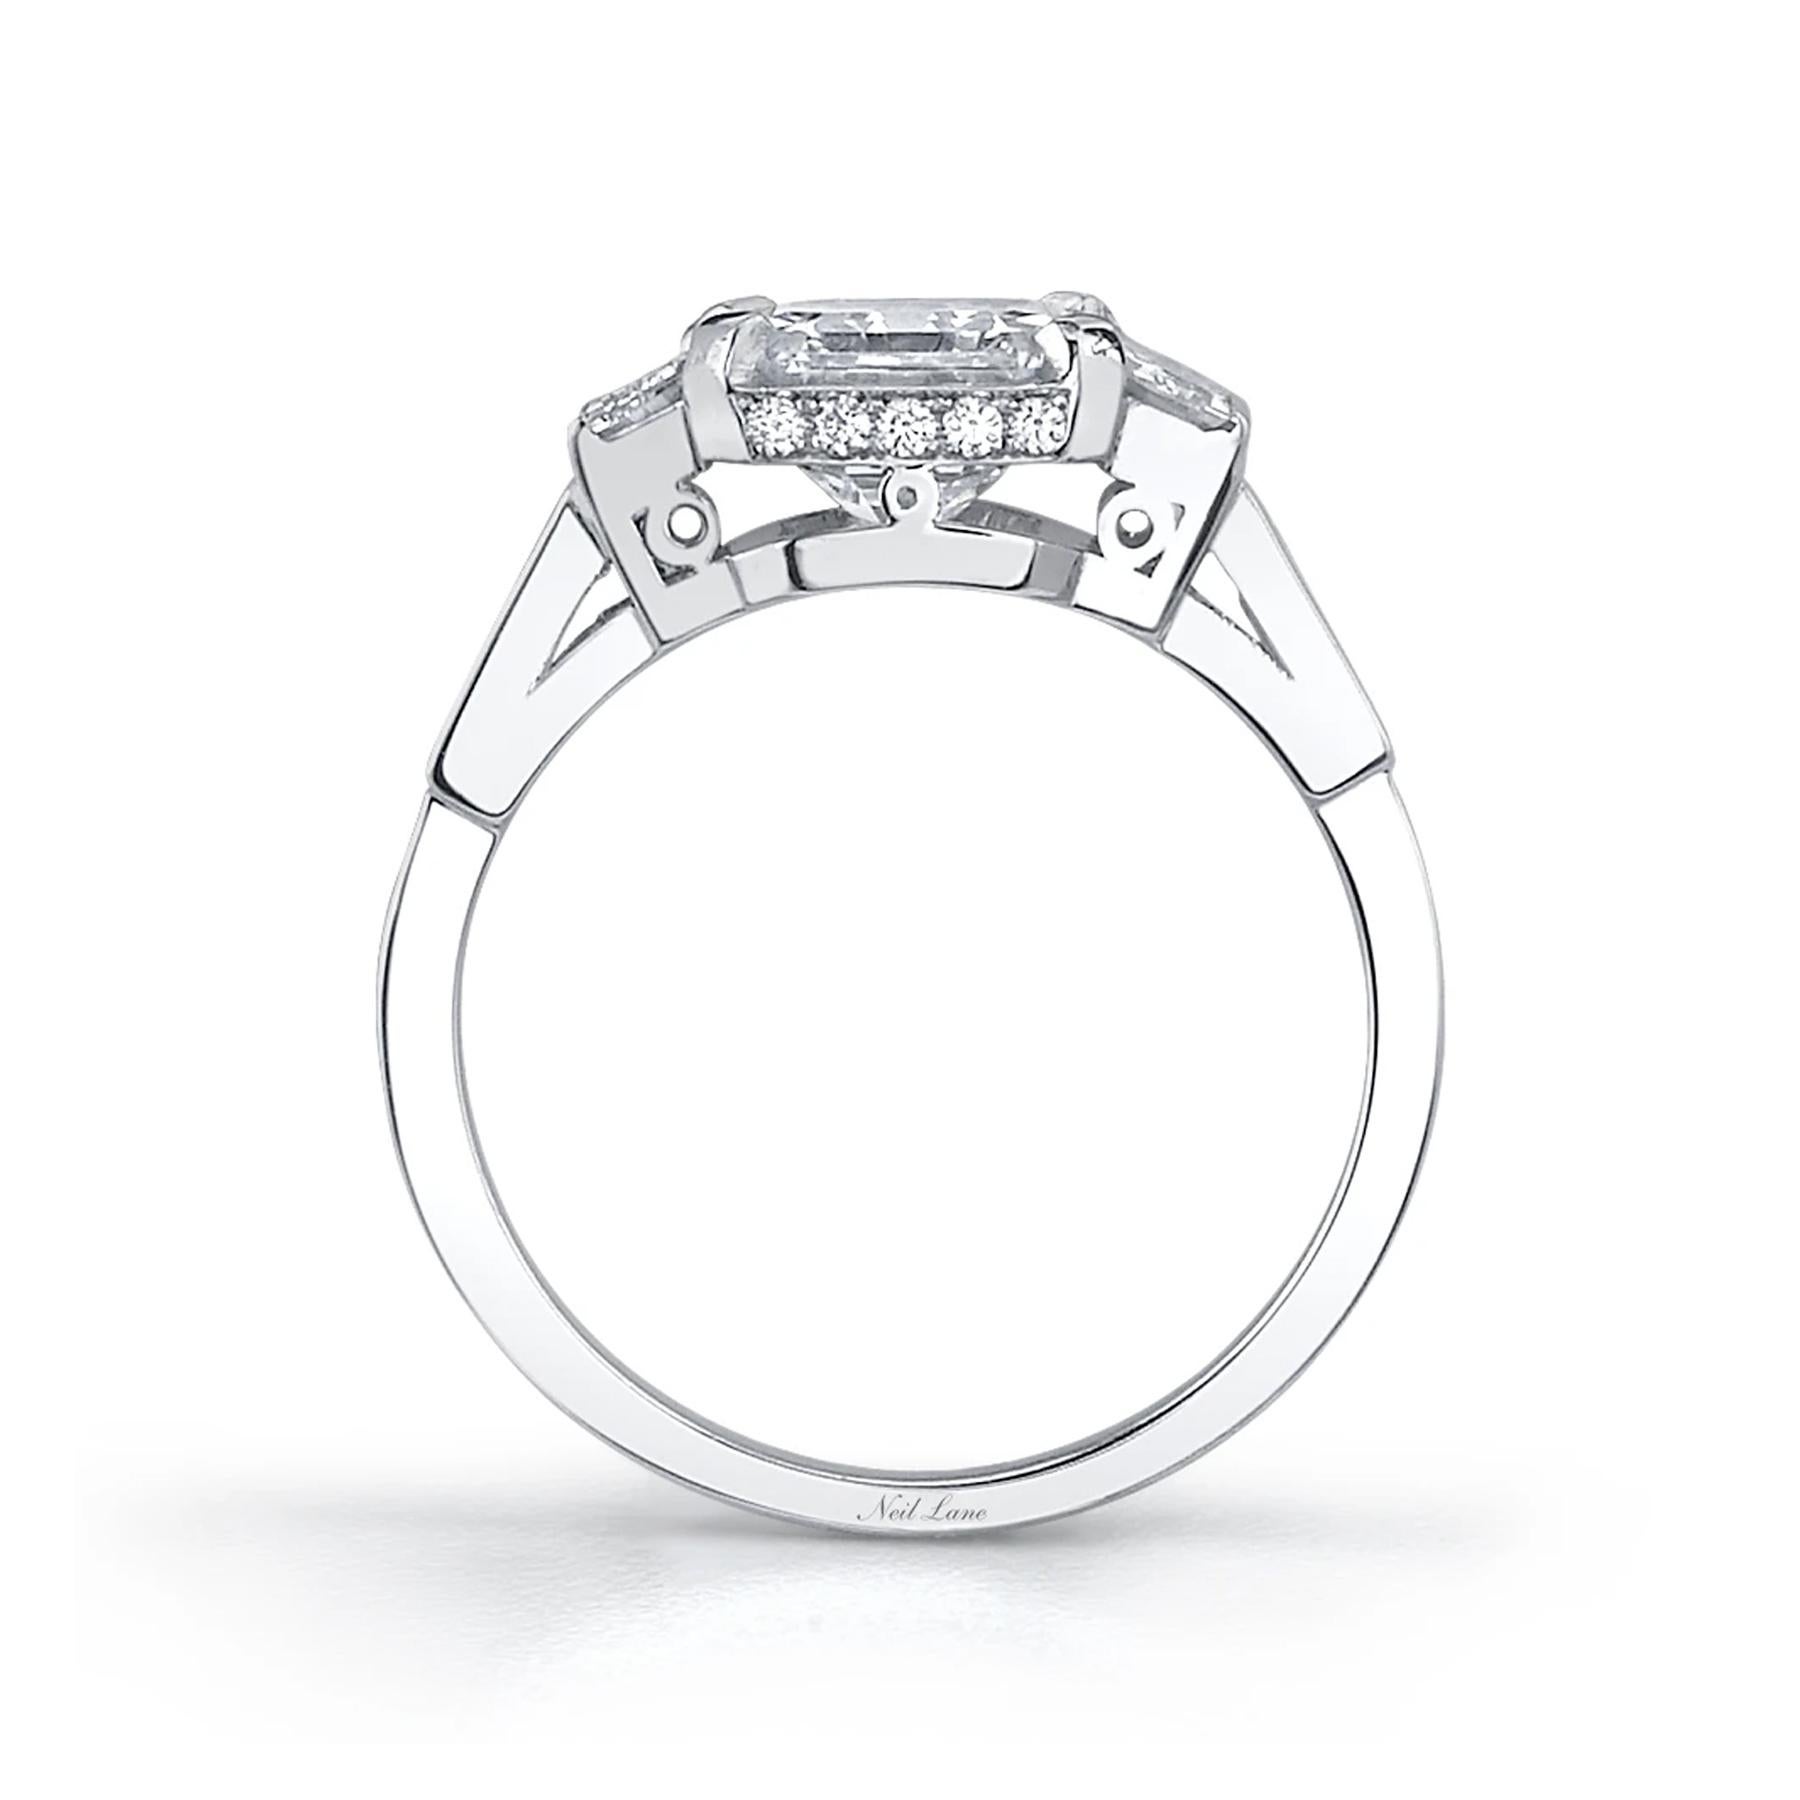 A master of design together with a thorough knowledge of the Art Deco period, Neil Lane created this Art Deco inspired ring with a balance of shape and harmony as the foundation for this square emerald-cut diamond (also known as an Asscher-Cut),